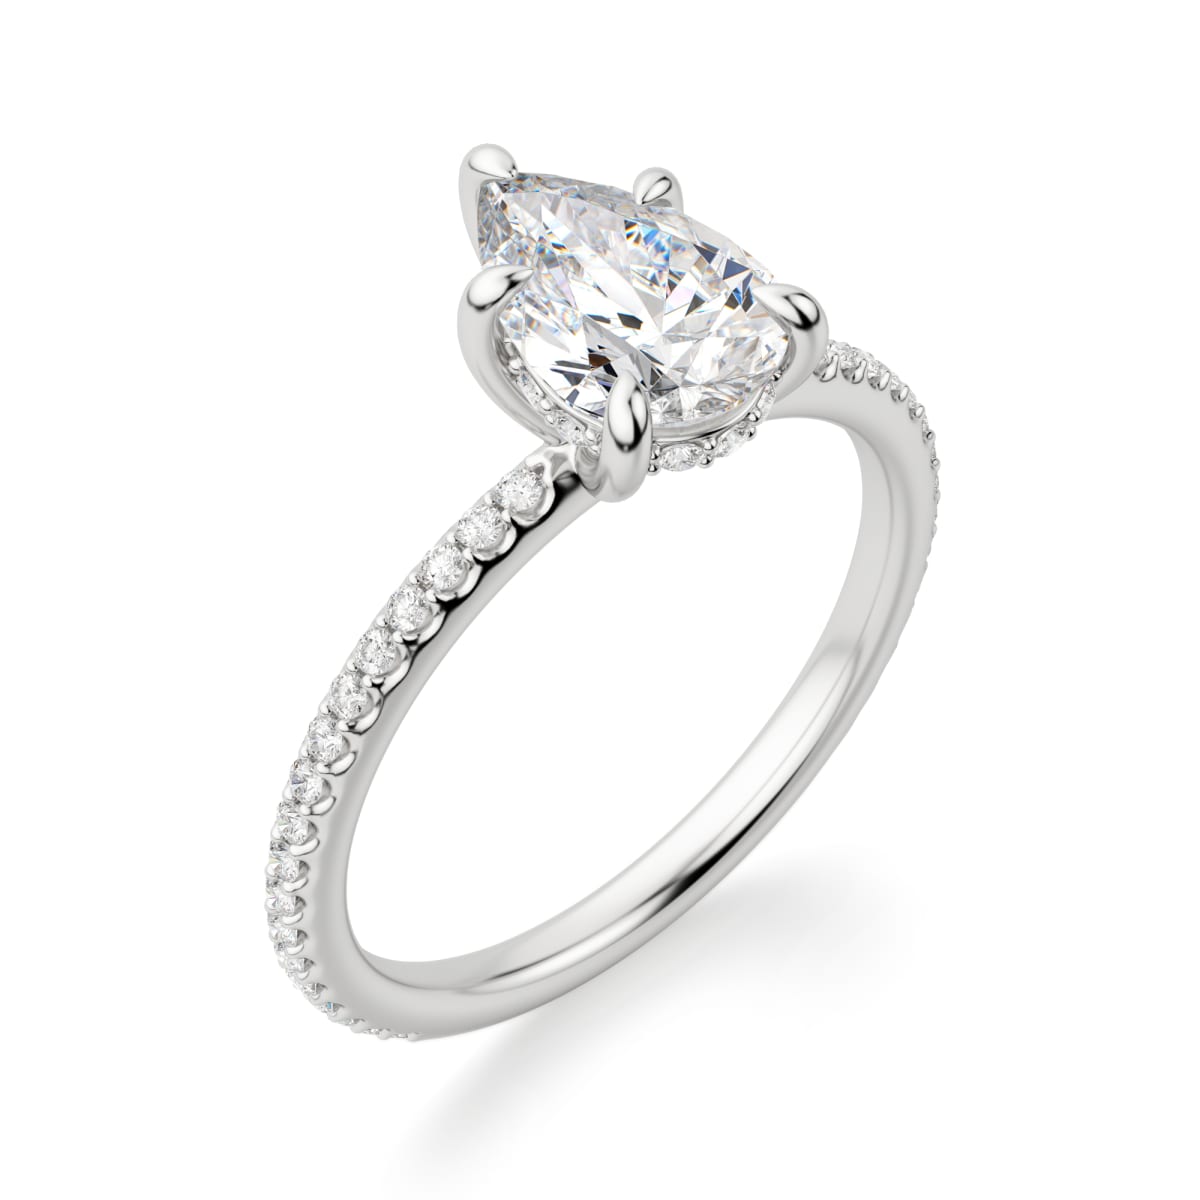 Hidden Halo Accented Engagement Ring With 1.75 ct Pear Center DEW, Ring Size 7.25, 14K White Gold, Moissanite